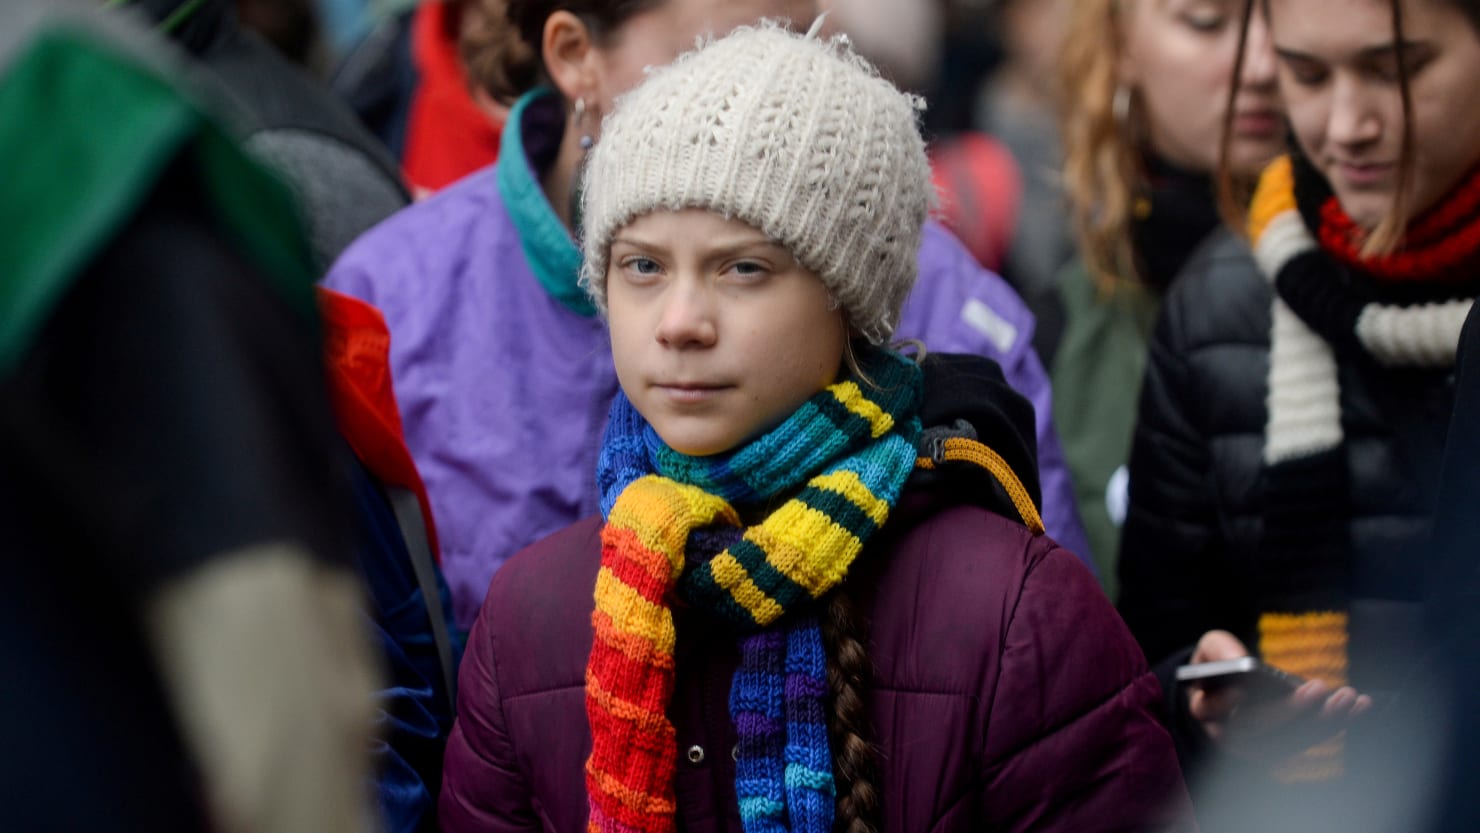 Greta Thunberg gives up UN climate conference on “vaccine nationalism” over coronavirus